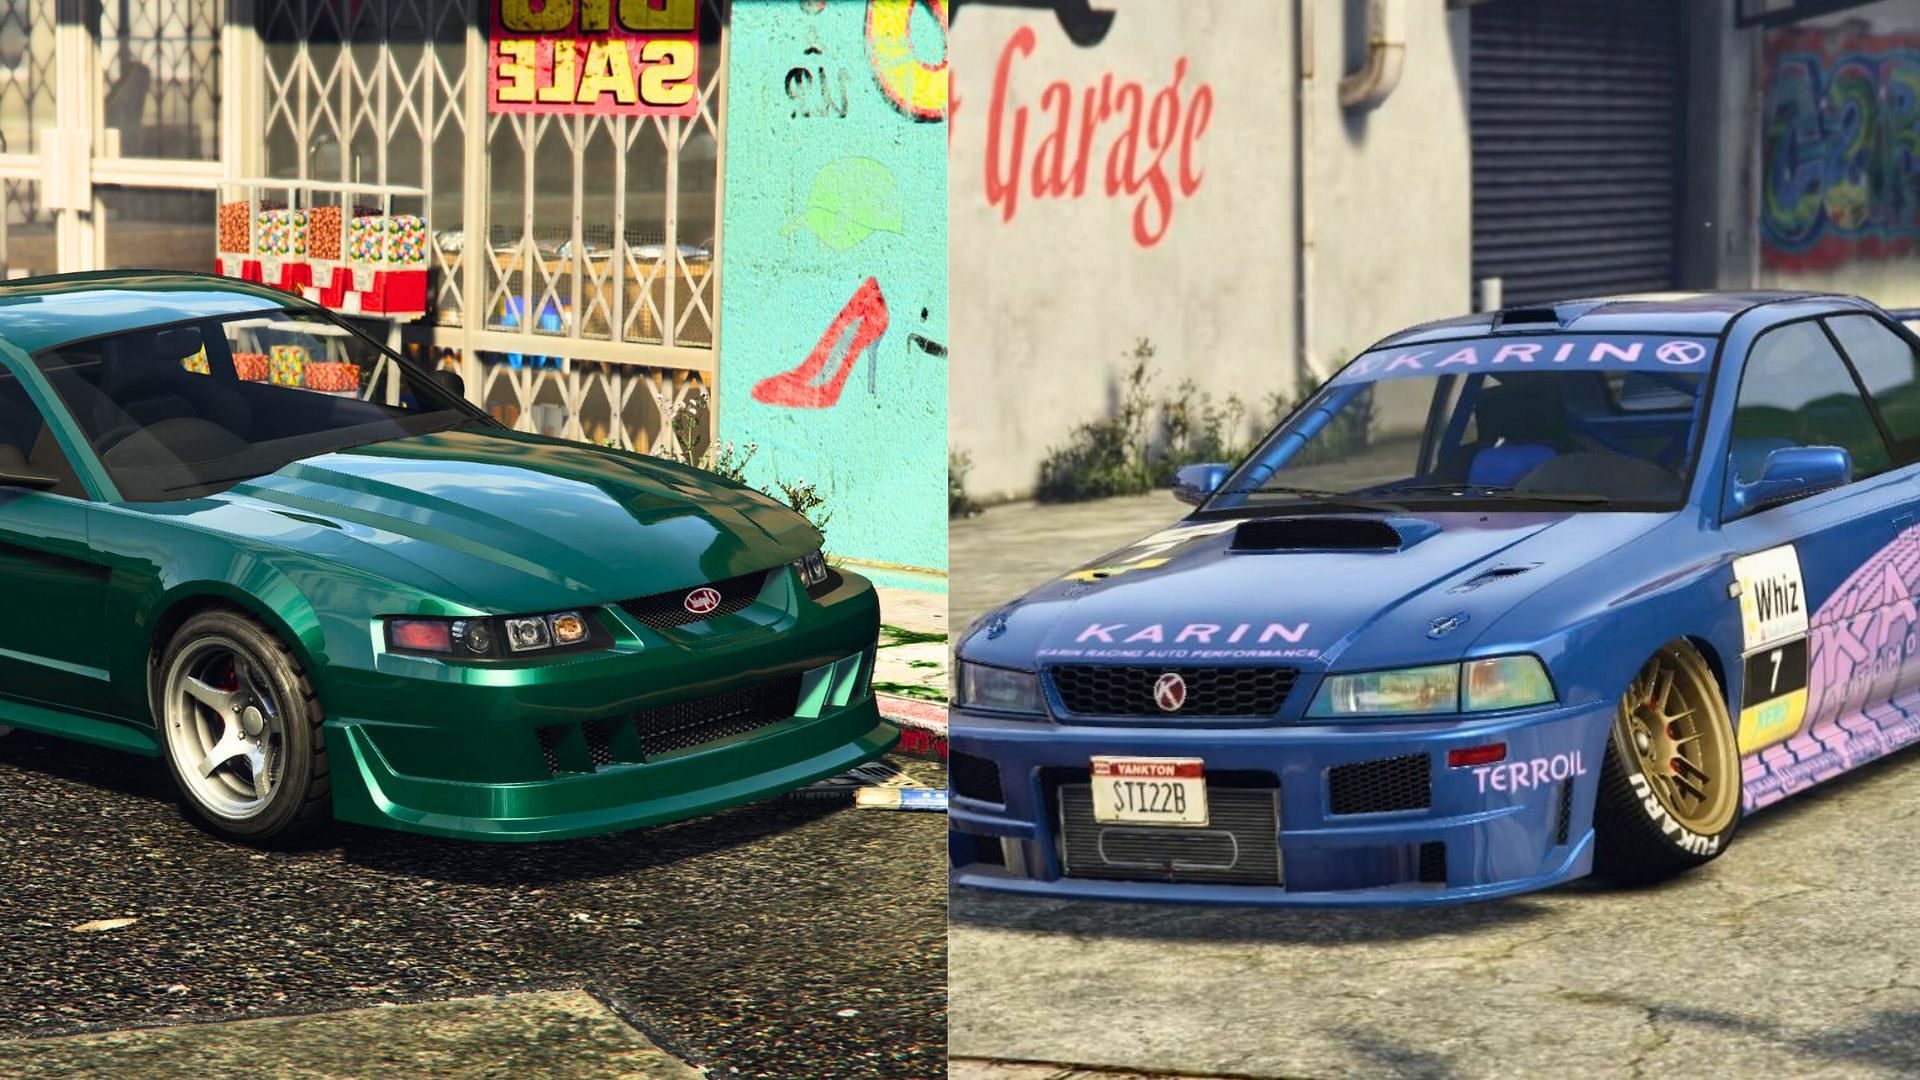 A brief report on the new GTA Online Podium Vehicle &amp; Prize Car (Image via crybabbo, JustinR512/GTAForums)